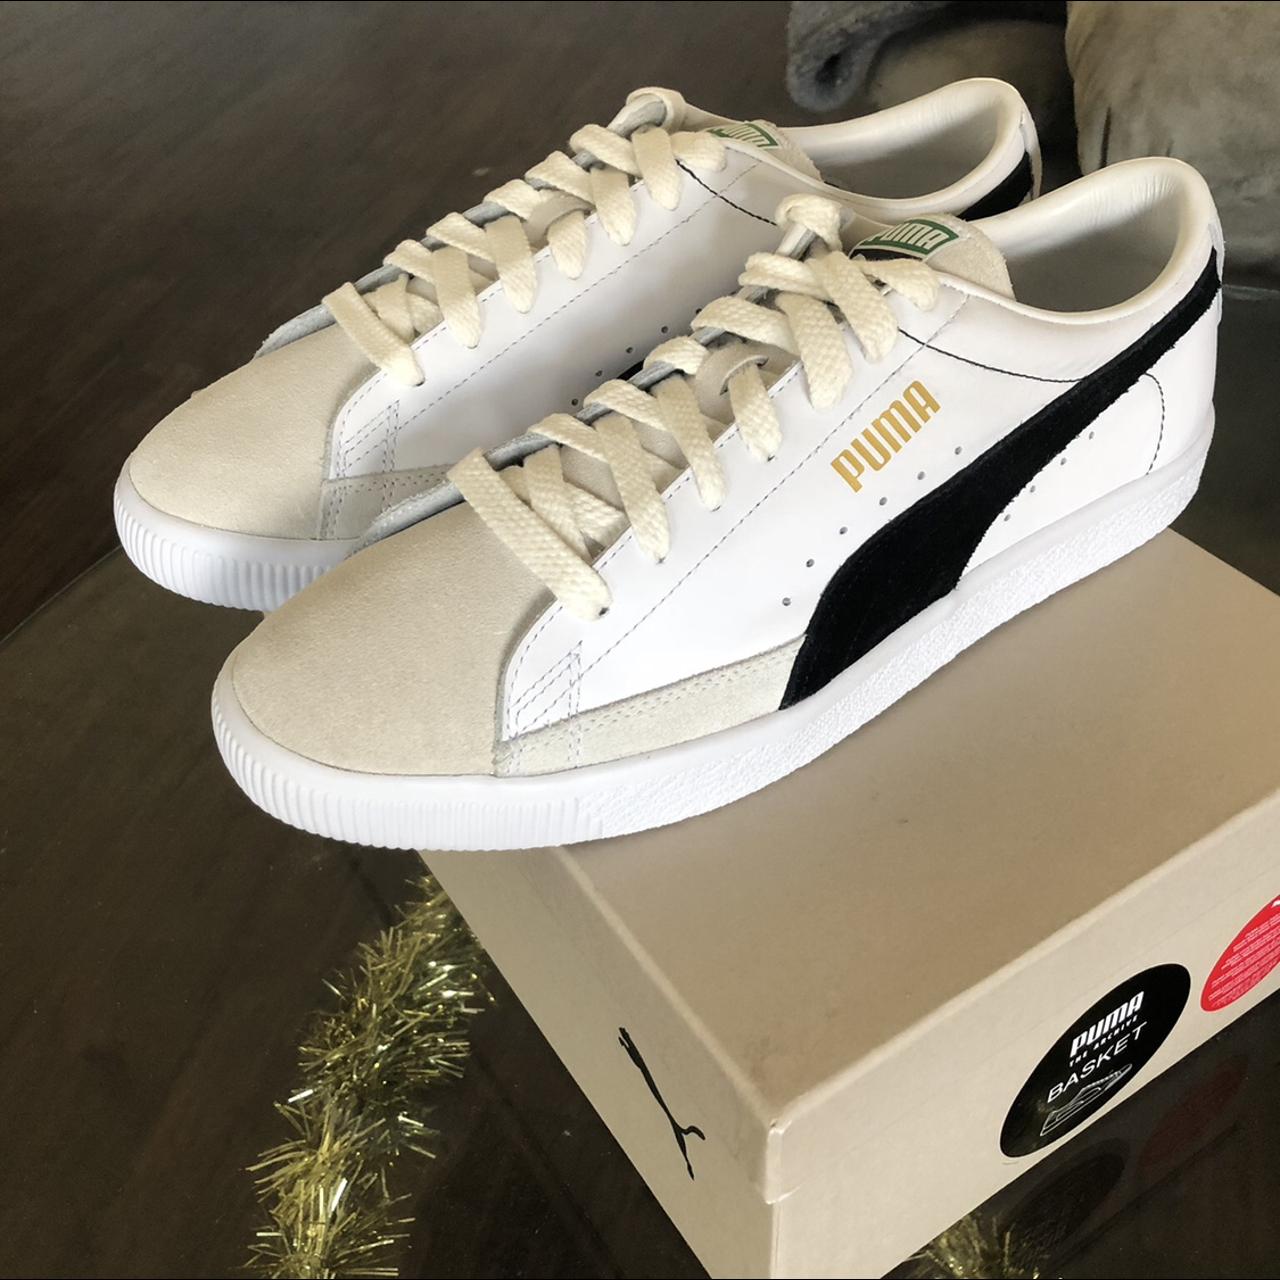 Jay-Z's Puma sneakers are a £90 steal